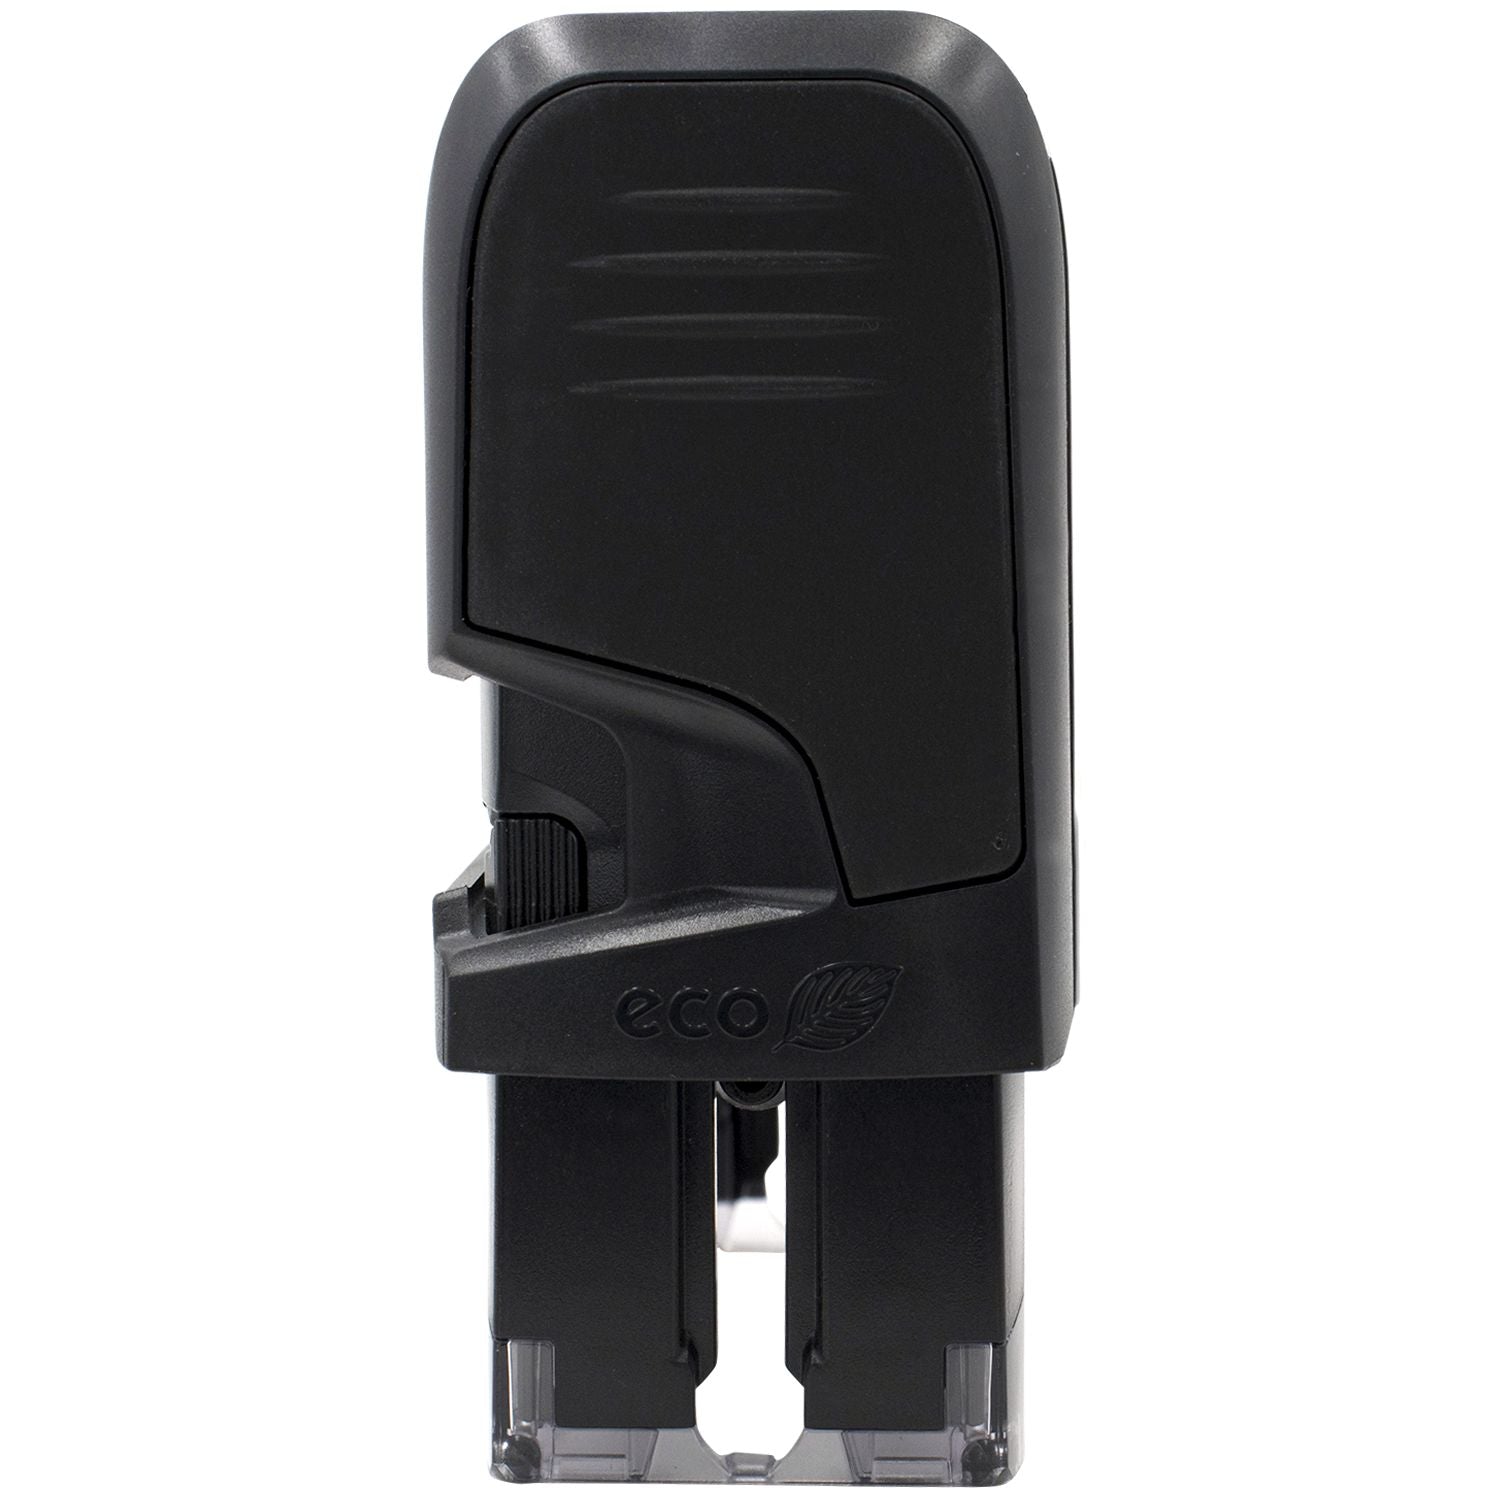 Self Inking No Referral Needed Stamp Side View